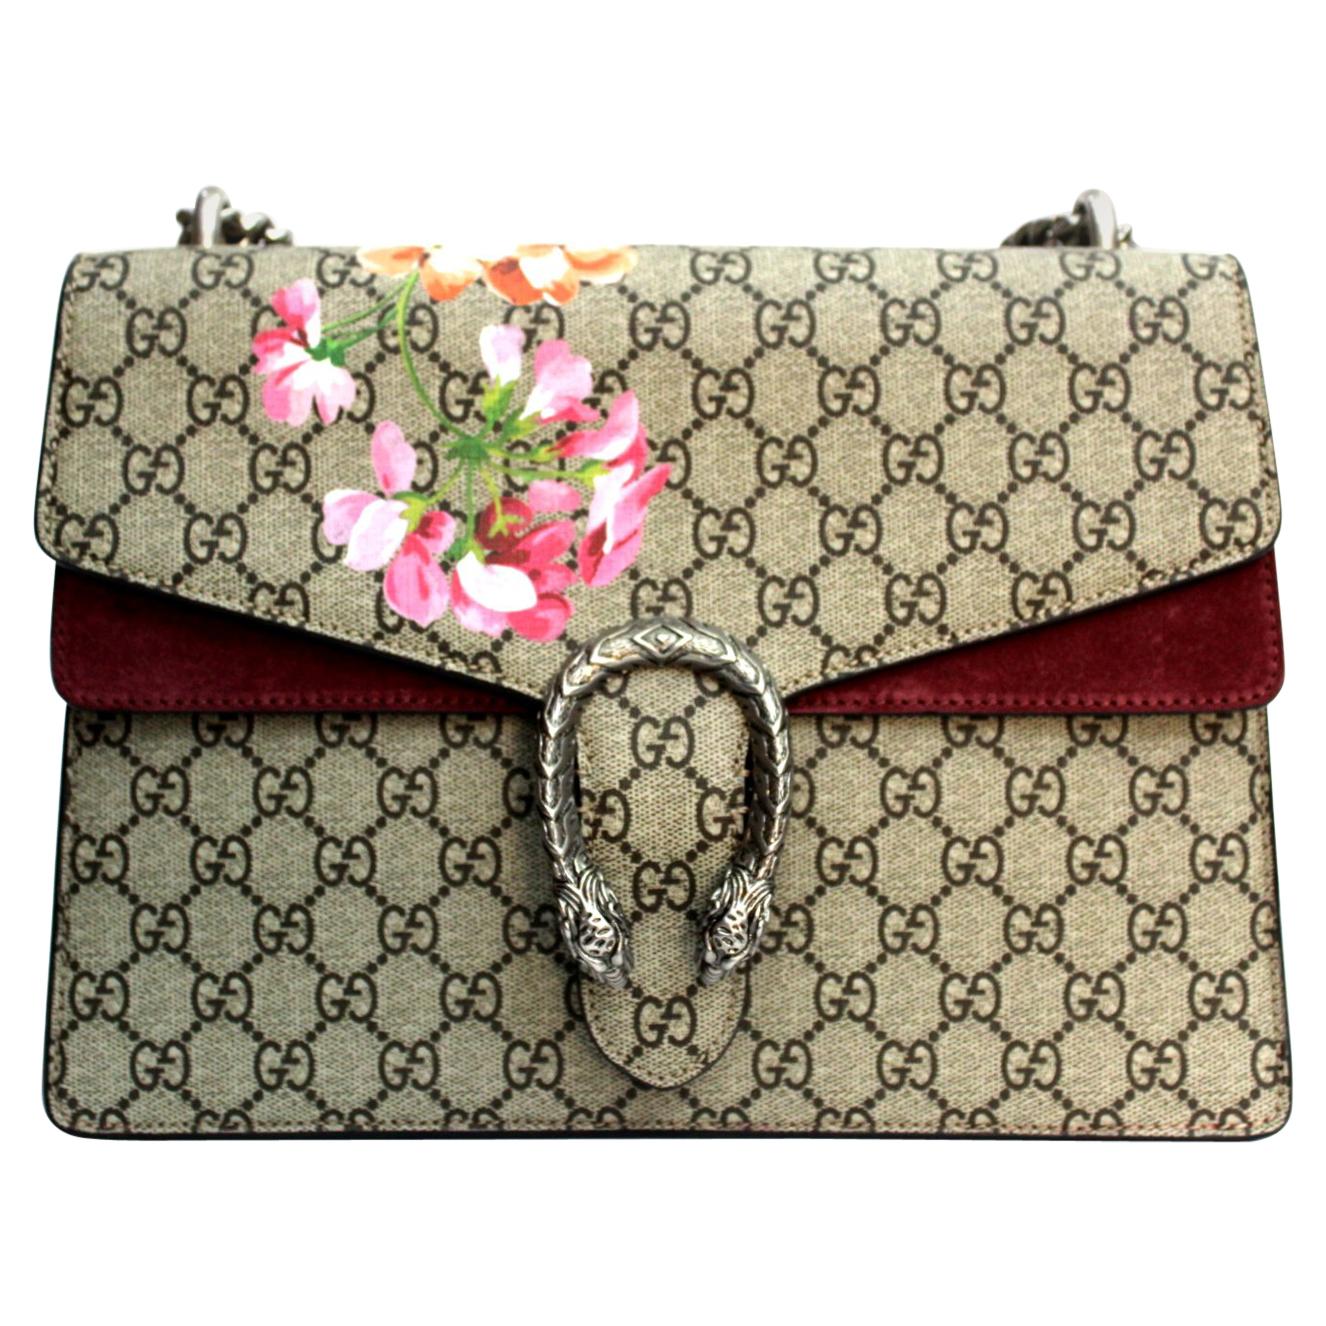 2018 Gucci Dyonisus Blooms Bag